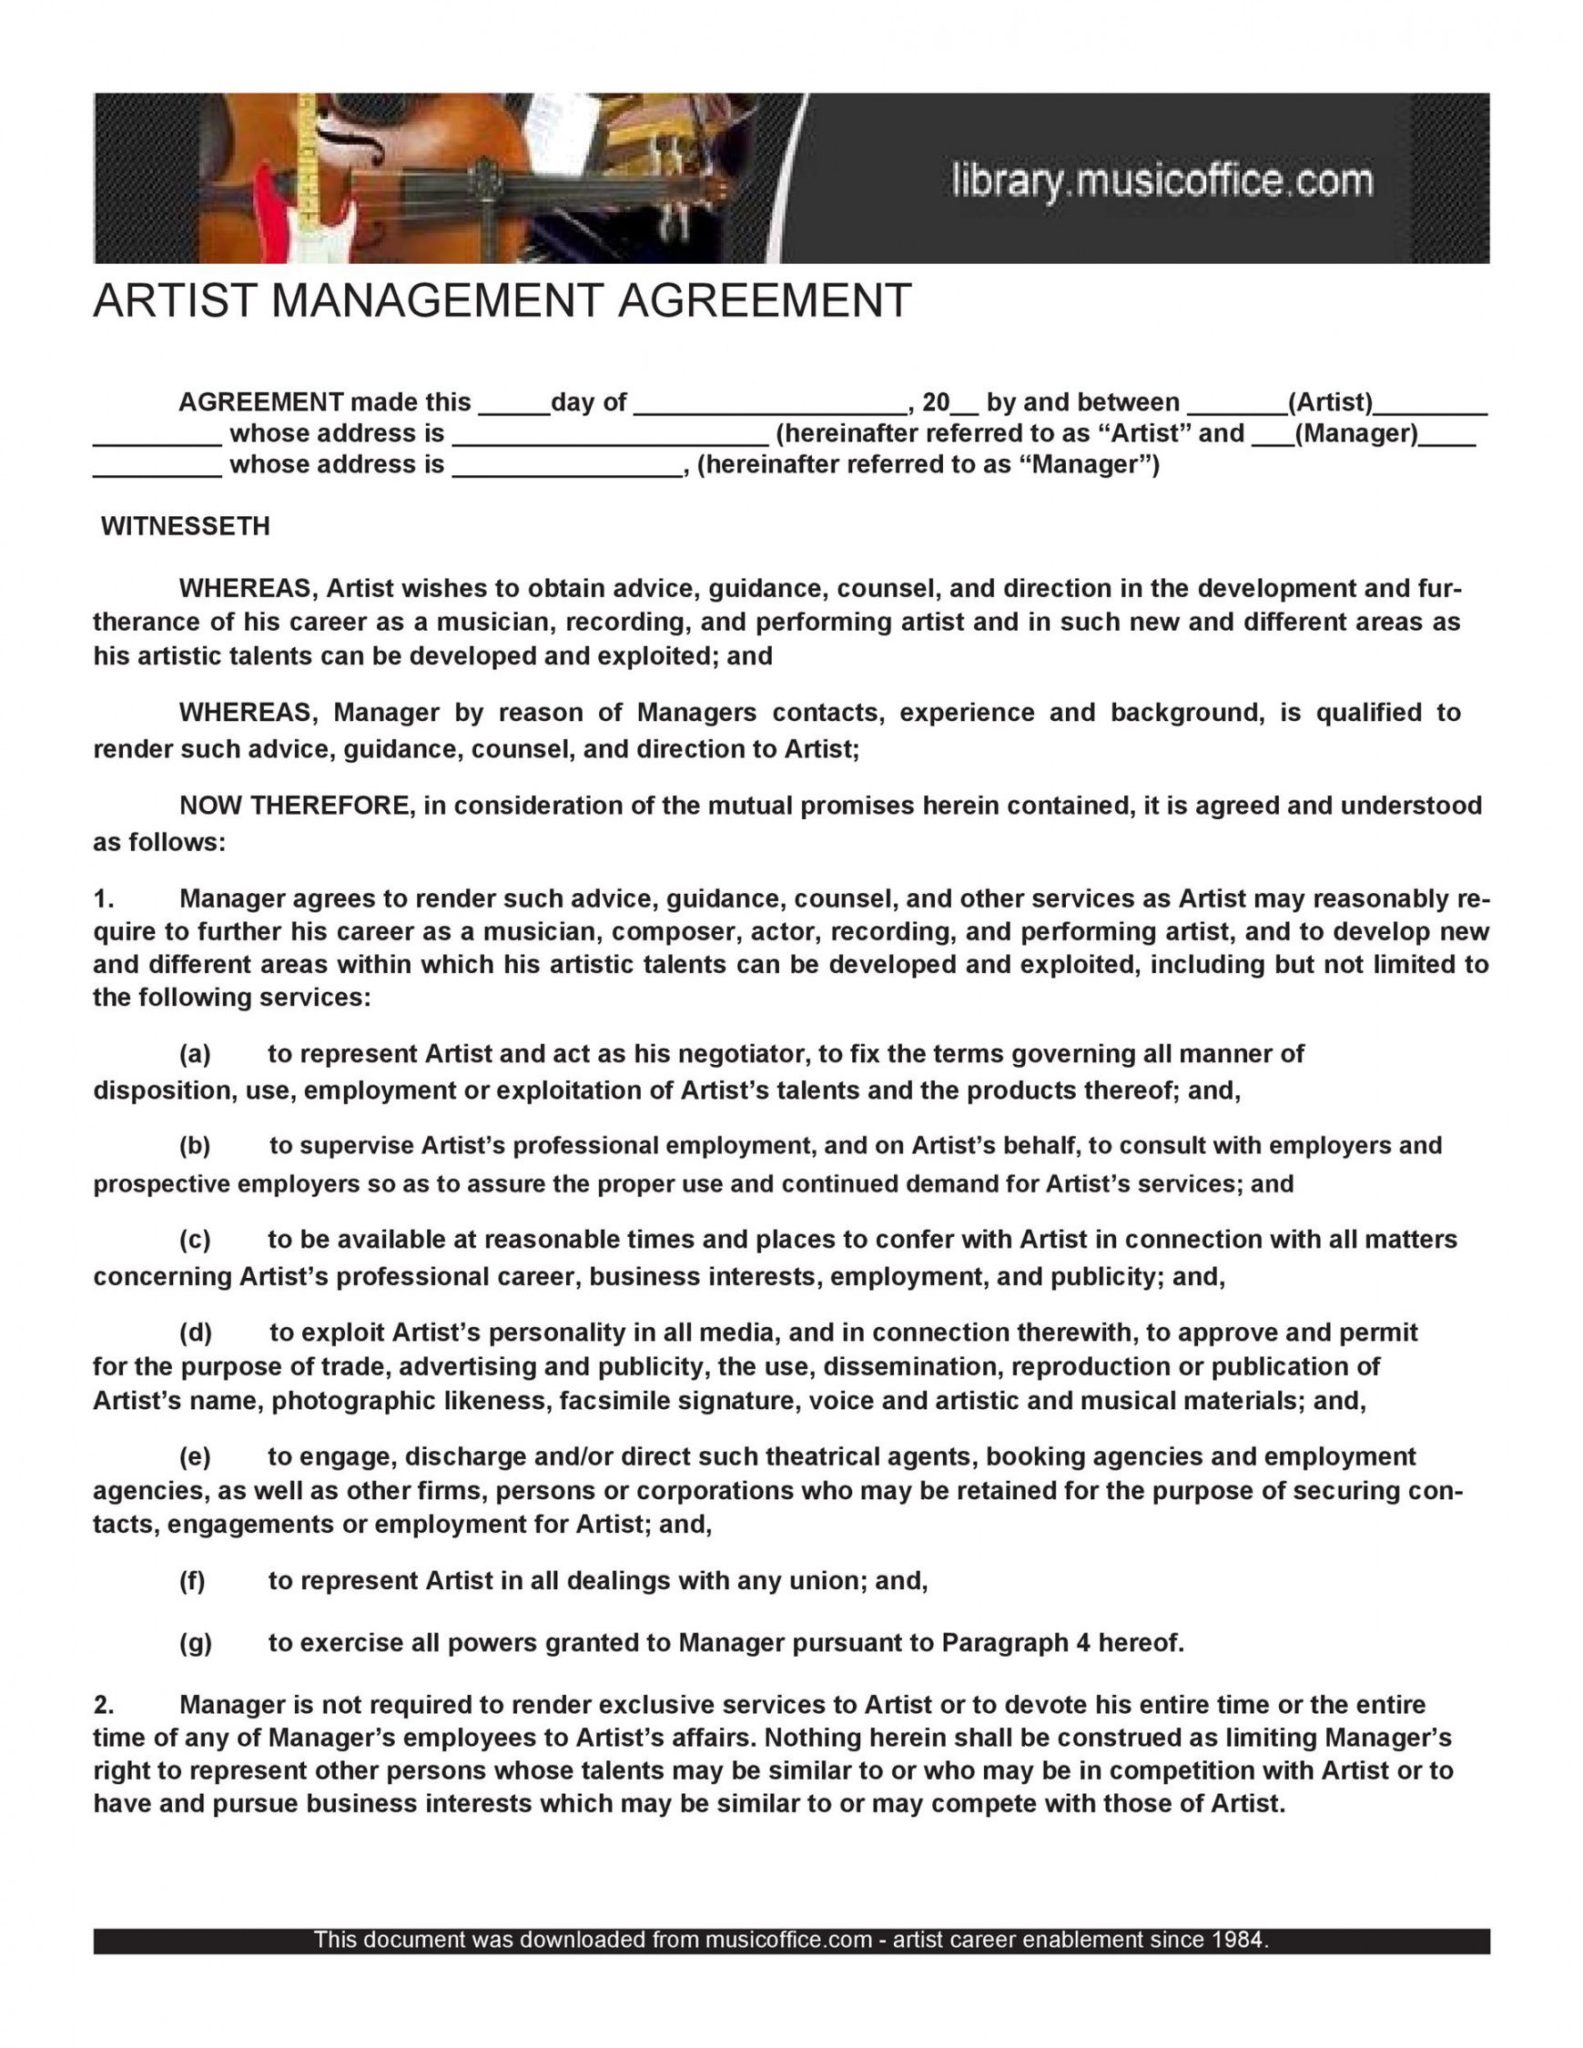 Free 50 Artist Management Contract Templates Ms Word Templatelab Music